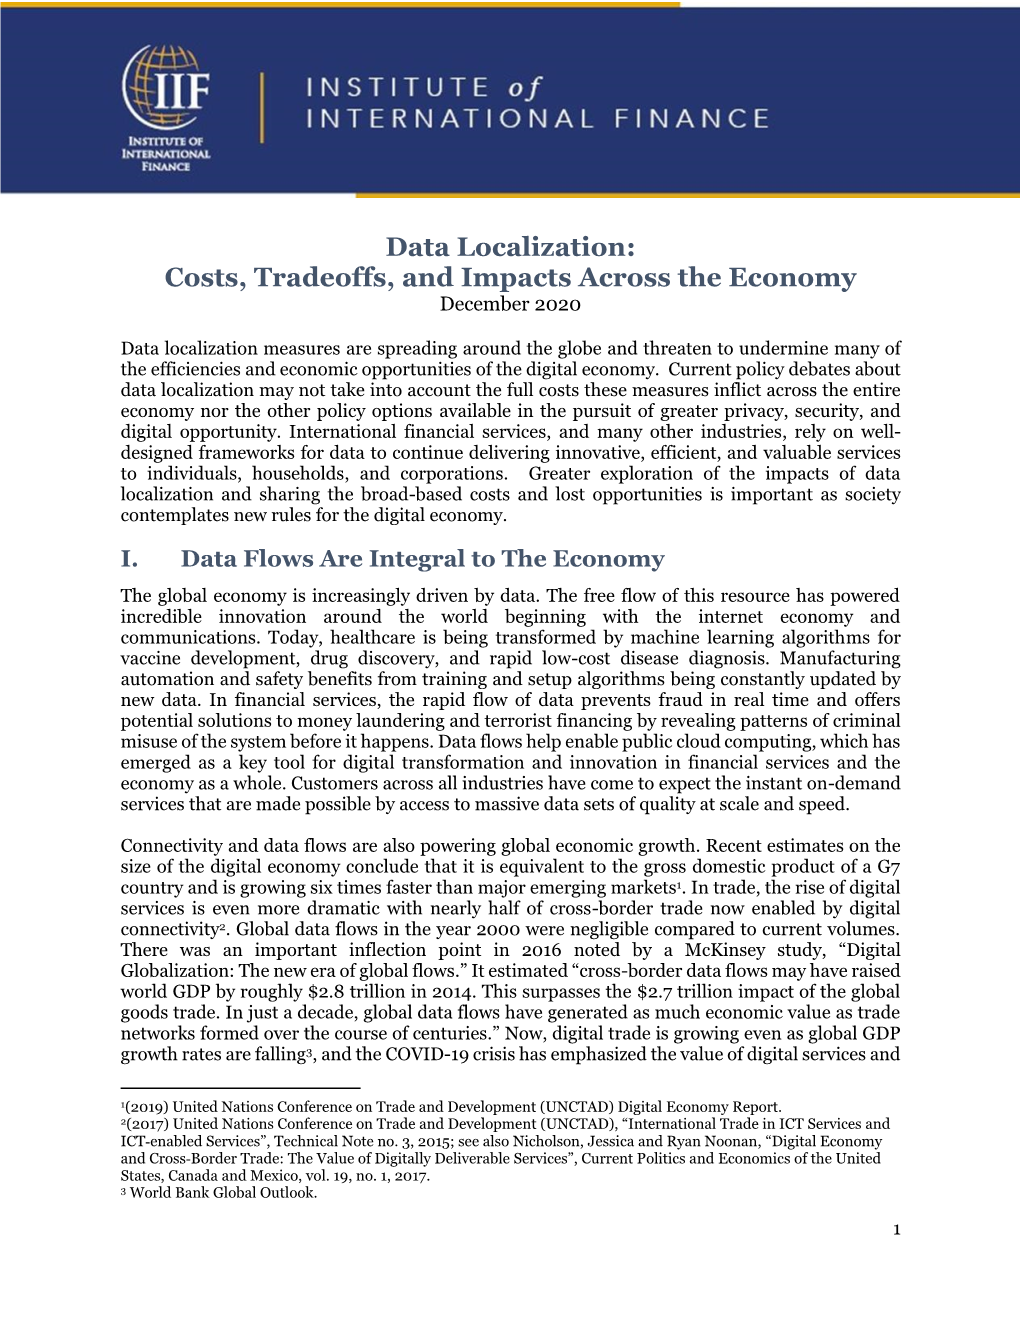 Data Localization: Costs, Tradeoffs, and Impacts Across the Economy December 2020